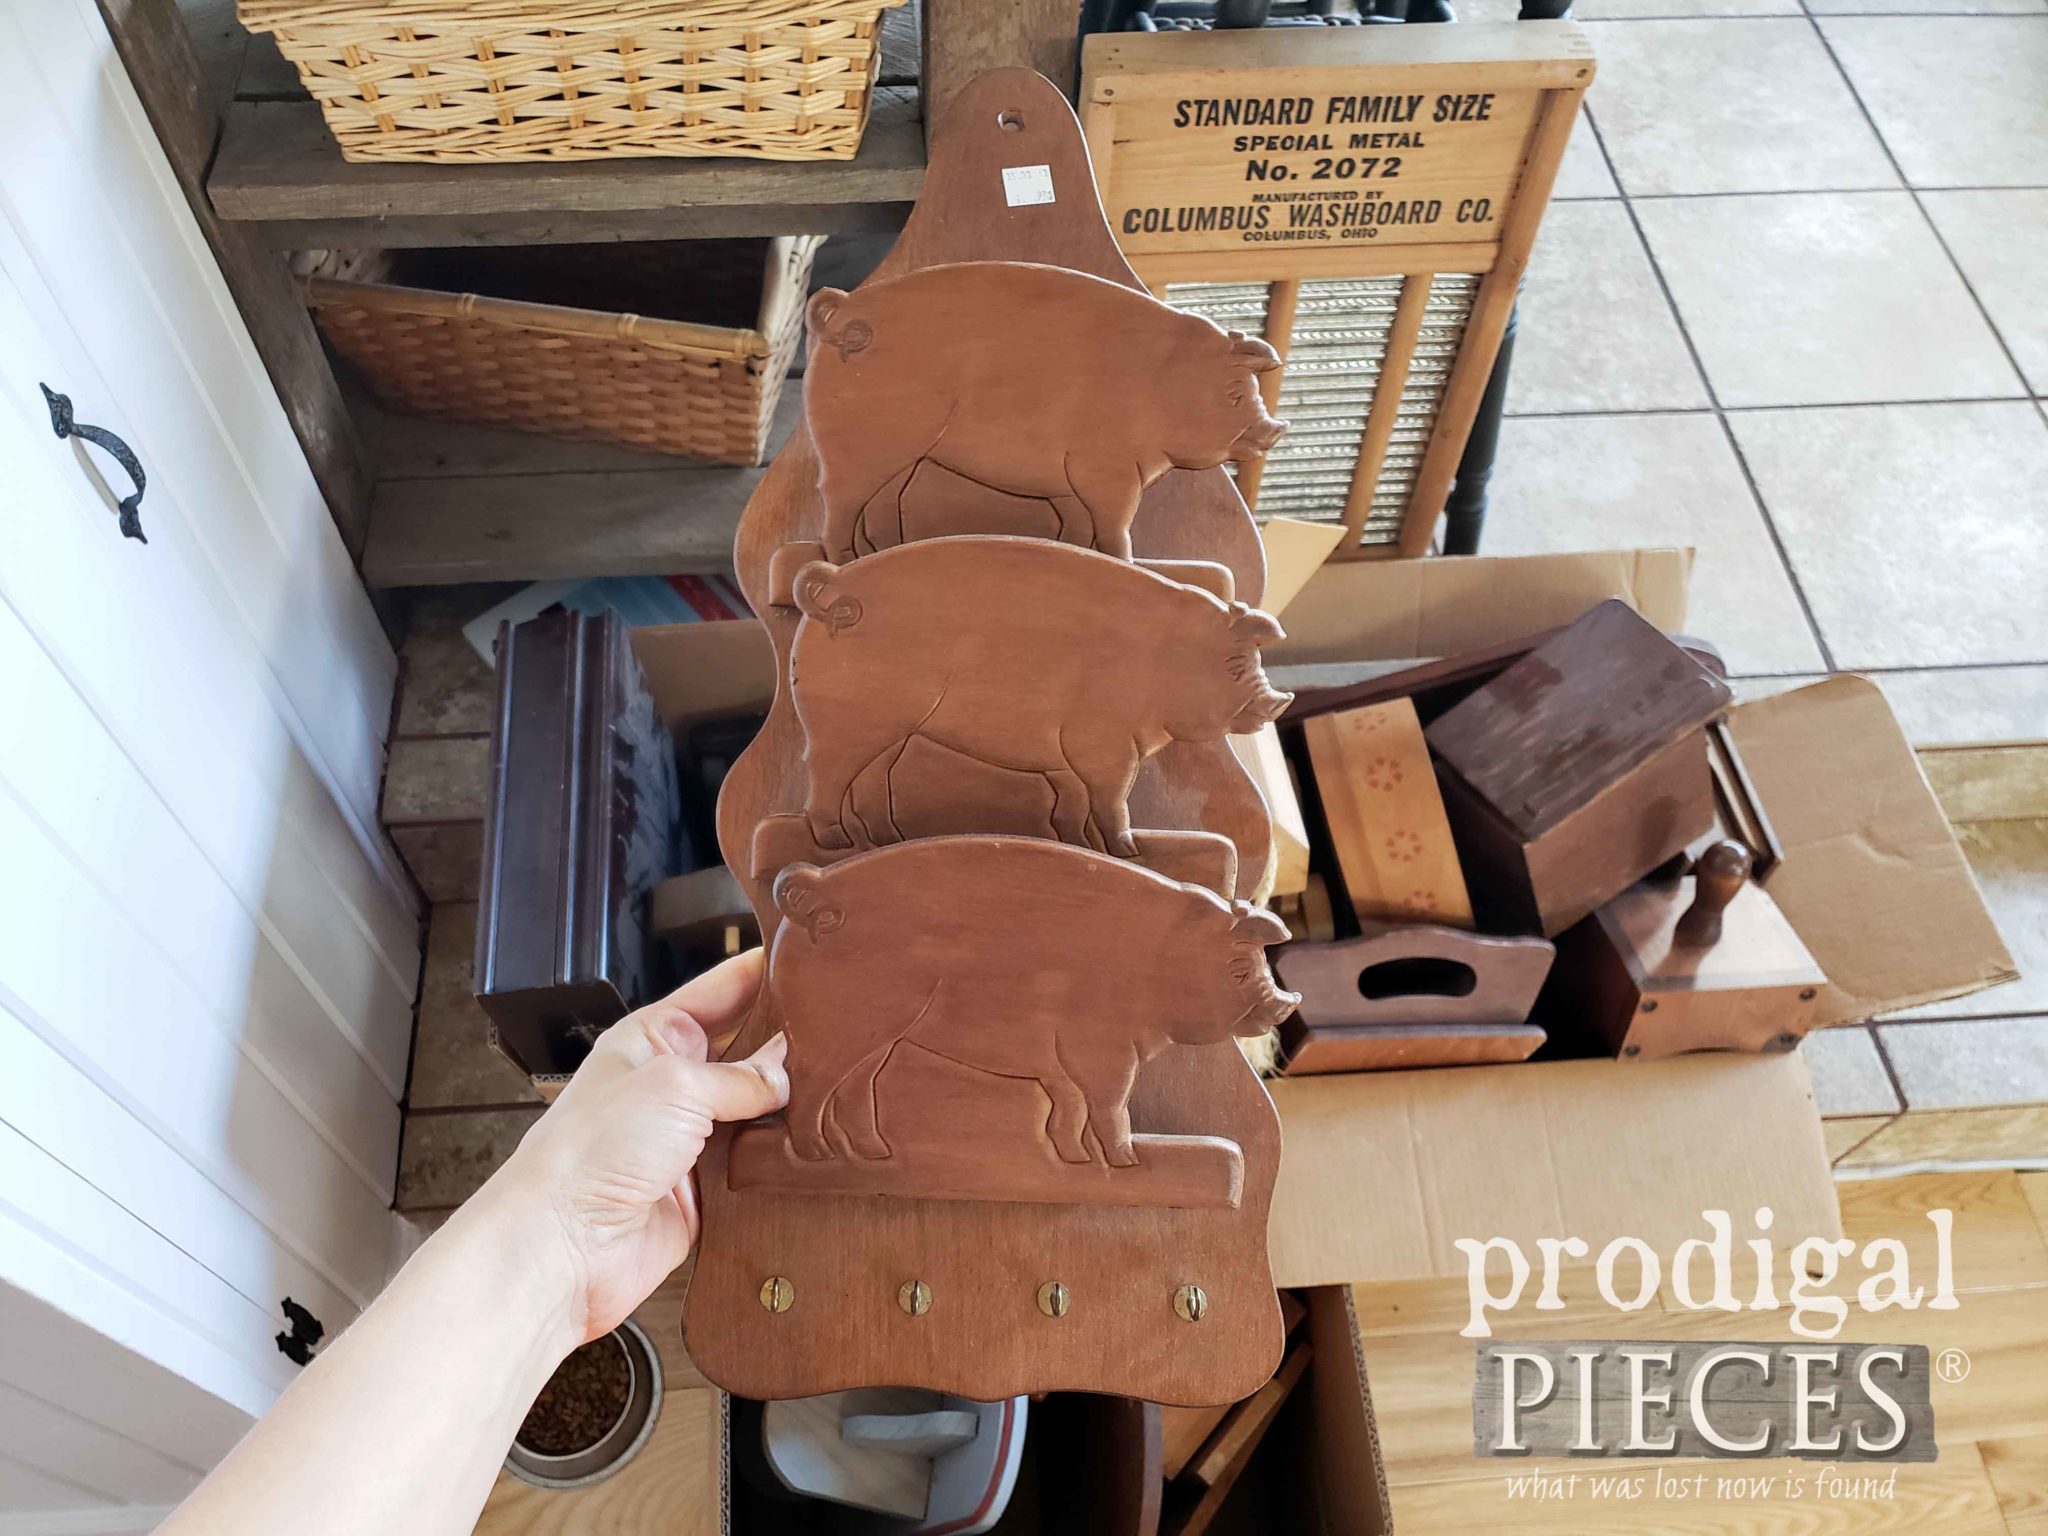 Vintage Letter Holder Before Makeover by Prodigal Pieces | prodigalpieces.com